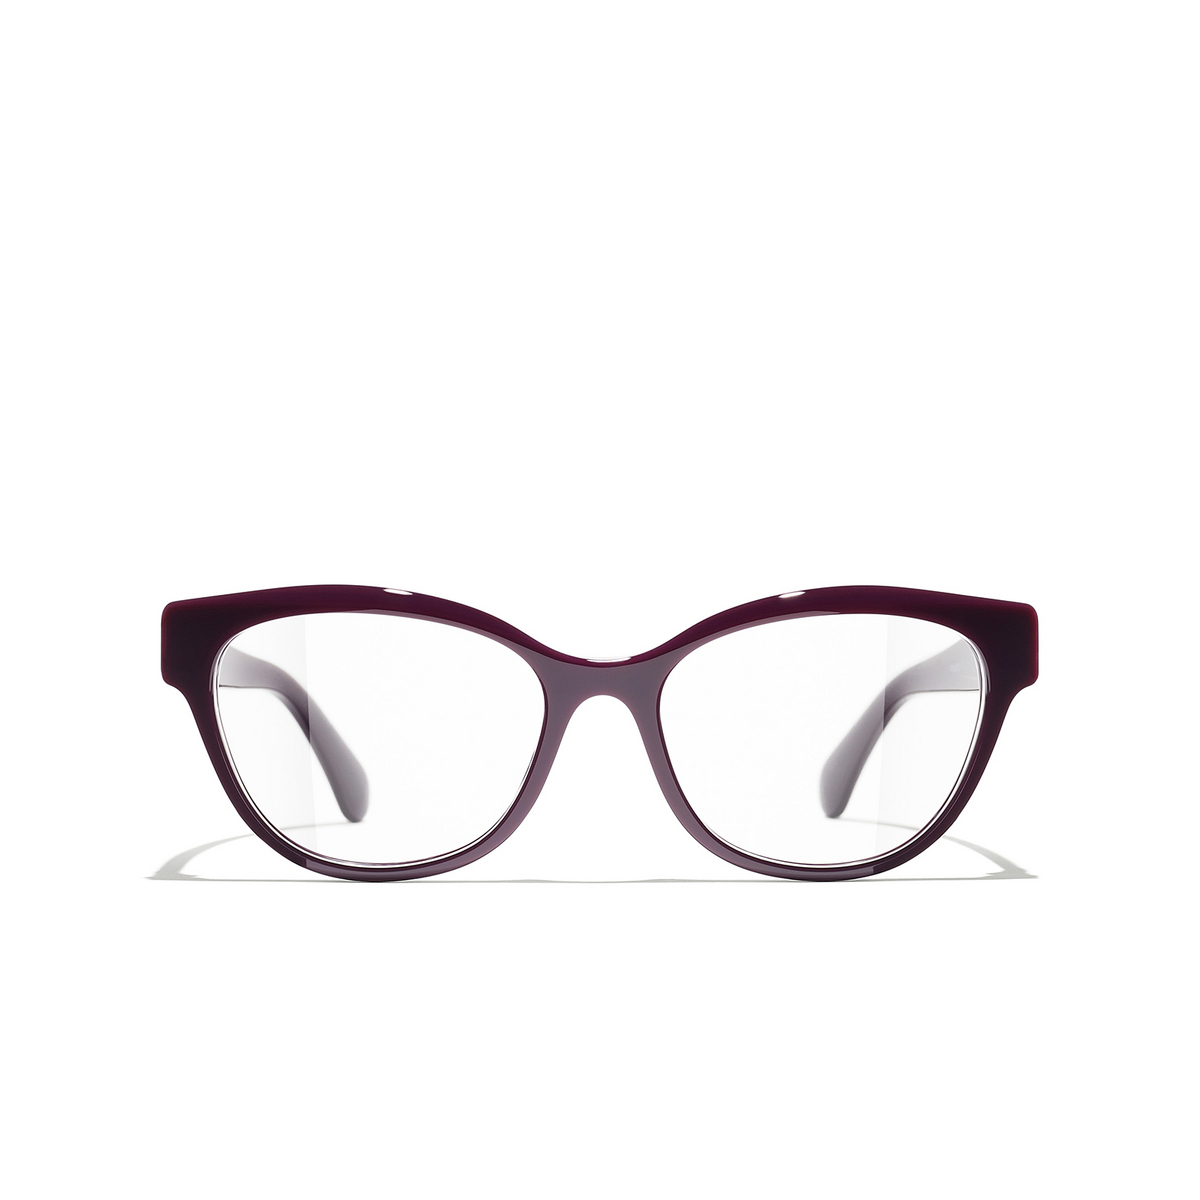 CHANEL butterfly Eyeglasses 1068 Burgundy - front view